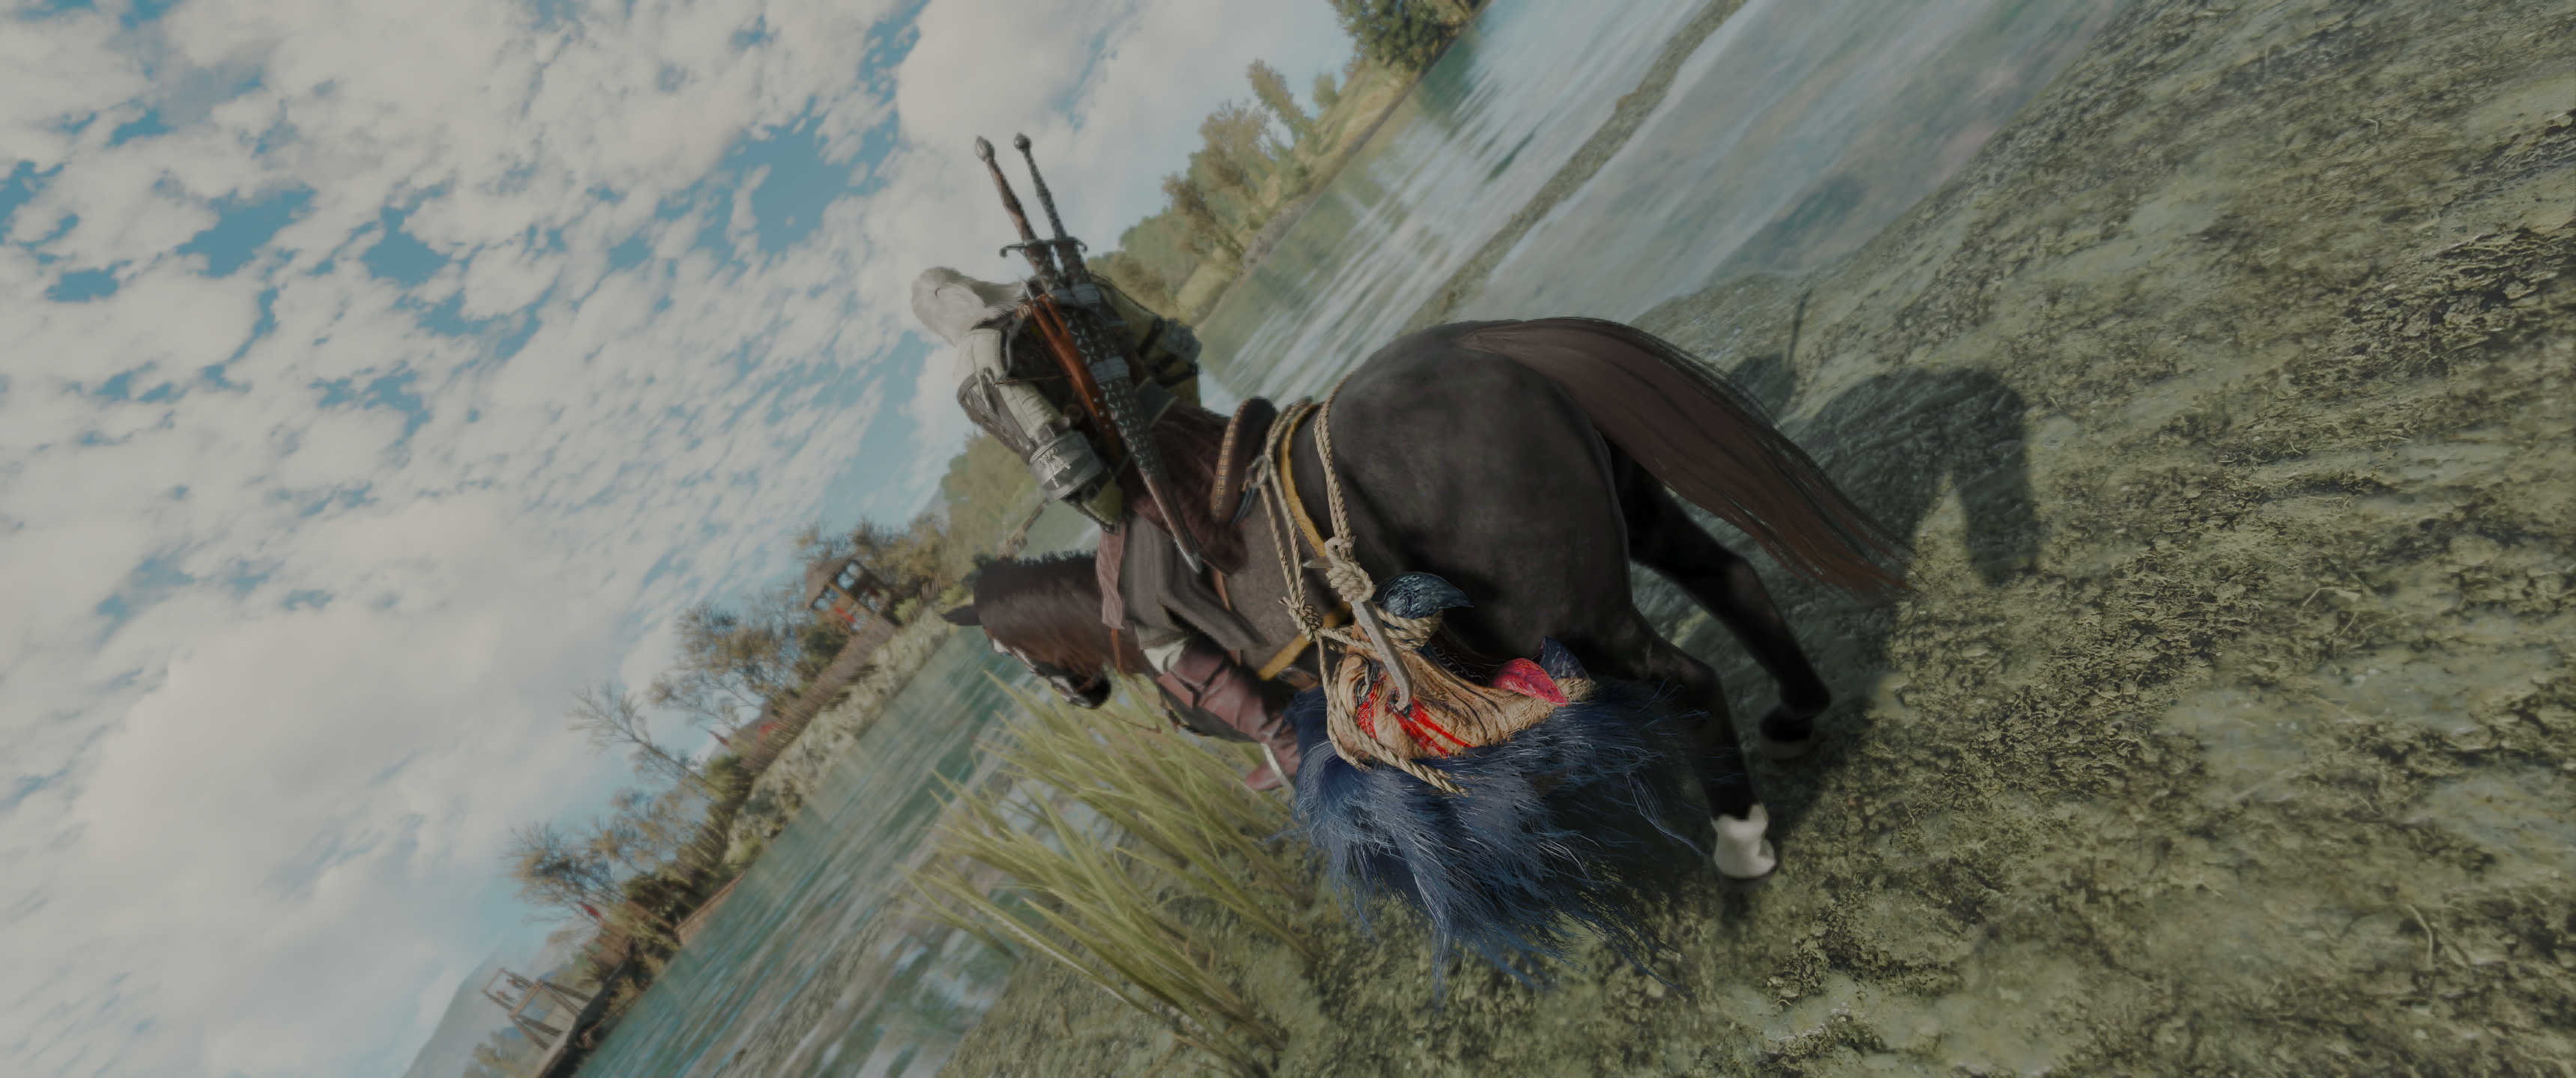 The Witcher 3 Wild Hunt Geralt Of Rivia Griffin Video Games CGi Sky Clouds Water Horse Sword Armor A 3440x1440